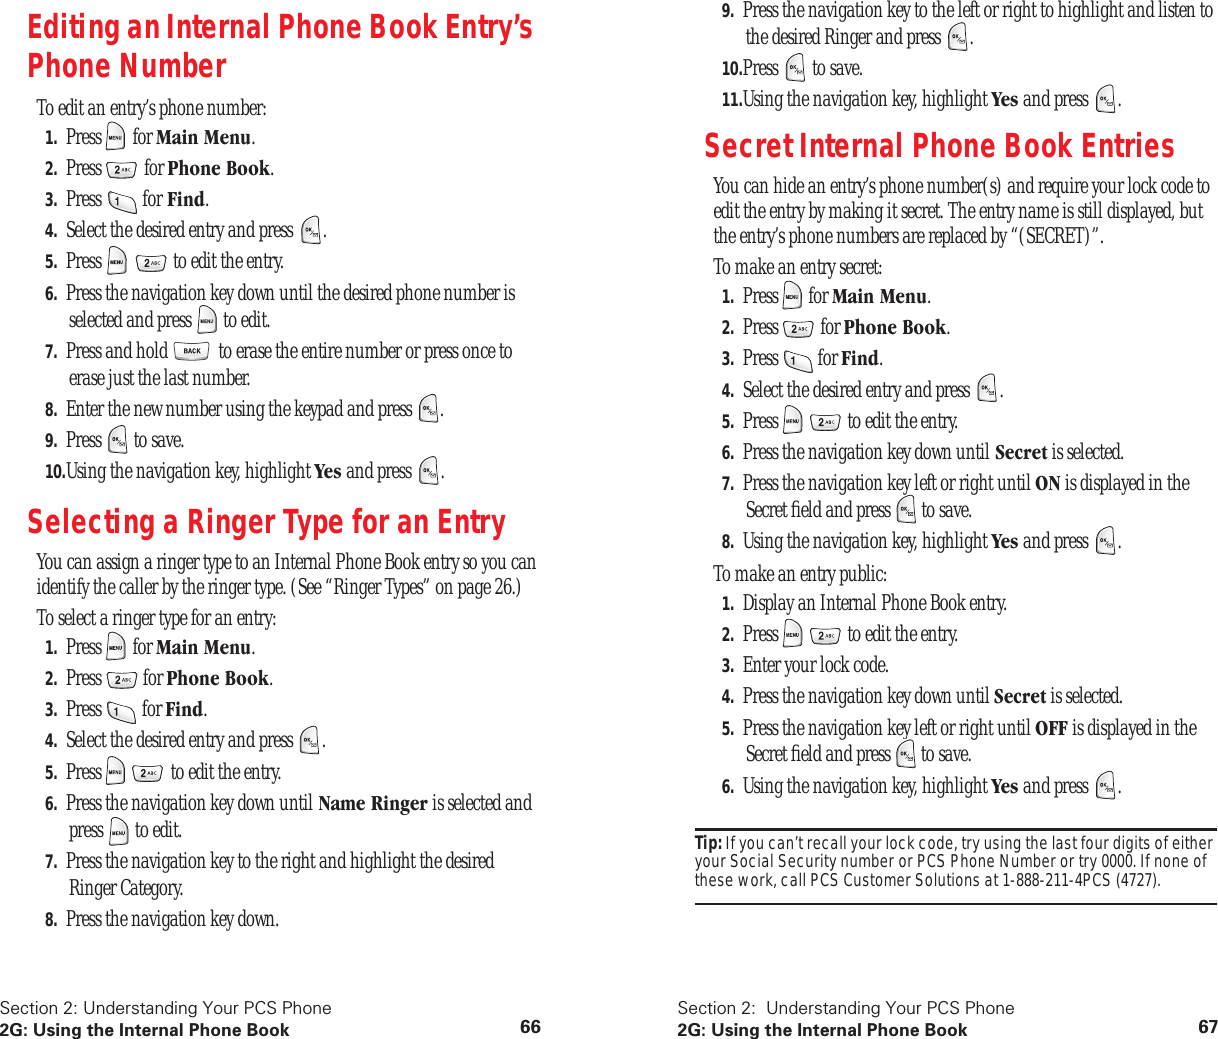 Section 2: Understanding Your PCS Phone2G: Using the Internal Phone Book 66Editing an Internal Phone Book Entry’s Phone NumberTo edit an entry’s phone number:1. Press  for Main Menu.2. Press  for Phone Book.3. Press  for Find.4. Select the desired entry and press  .5. Press     to edit the entry.6. Press the navigation key down until the desired phone number is selected and press   to edit.7. Press and hold   to erase the entire number or press once to erase just the last number.8. Enter the new number using the keypad and press  .9. Press   to save.10.Using the navigation key, highlight Yes and press  .Selecting a Ringer Type for an EntryYou can assign a ringer type to an Internal Phone Book entry so you can identify the caller by the ringer type. (See “Ringer Types” on page 26.)To select a ringer type for an entry:1. Press  for Main Menu.2. Press  for Phone Book.3. Press  for Find.4. Select the desired entry and press  .5. Press     to edit the entry.6. Press the navigation key down until Name Ringer is selected and press   to edit.7. Press the navigation key to the right and highlight the desired Ringer Category.8. Press the navigation key down.Section 2:  Understanding Your PCS Phone2G: Using the Internal Phone Book 679. Press the navigation key to the left or right to highlight and listen to the desired Ringer and press  .10.Press   to save.11.Using the navigation key, highlight Yes and press  .Secret Internal Phone Book EntriesYou can hide an entry’s phone number(s) and require your lock code to edit the entry by making it secret. The entry name is still displayed, but the entry’s phone numbers are replaced by “(SECRET)”.To make an entry secret:1. Press  for Main Menu.2. Press  for Phone Book.3. Press  for Find.4. Select the desired entry and press  .5. Press     to edit the entry.6. Press the navigation key down until Secret is selected.7. Press the navigation key left or right until ON is displayed in the Secret ﬁeld and press   to save.8. Using the navigation key, highlight Yes and press  .To make an entry public:1. Display an Internal Phone Book entry.2. Press     to edit the entry.3. Enter your lock code.4. Press the navigation key down until Secret is selected.5. Press the navigation key left or right until OFF is displayed in the Secret ﬁeld and press   to save.6. Using the navigation key, highlight Yes and press  .Tip: If you can’t recall your lock code, try using the last four digits of either your Social Security number or PCS Phone Number or try 0000. If none of these work, call PCS Customer Solutions at 1-888-211-4PCS (4727).